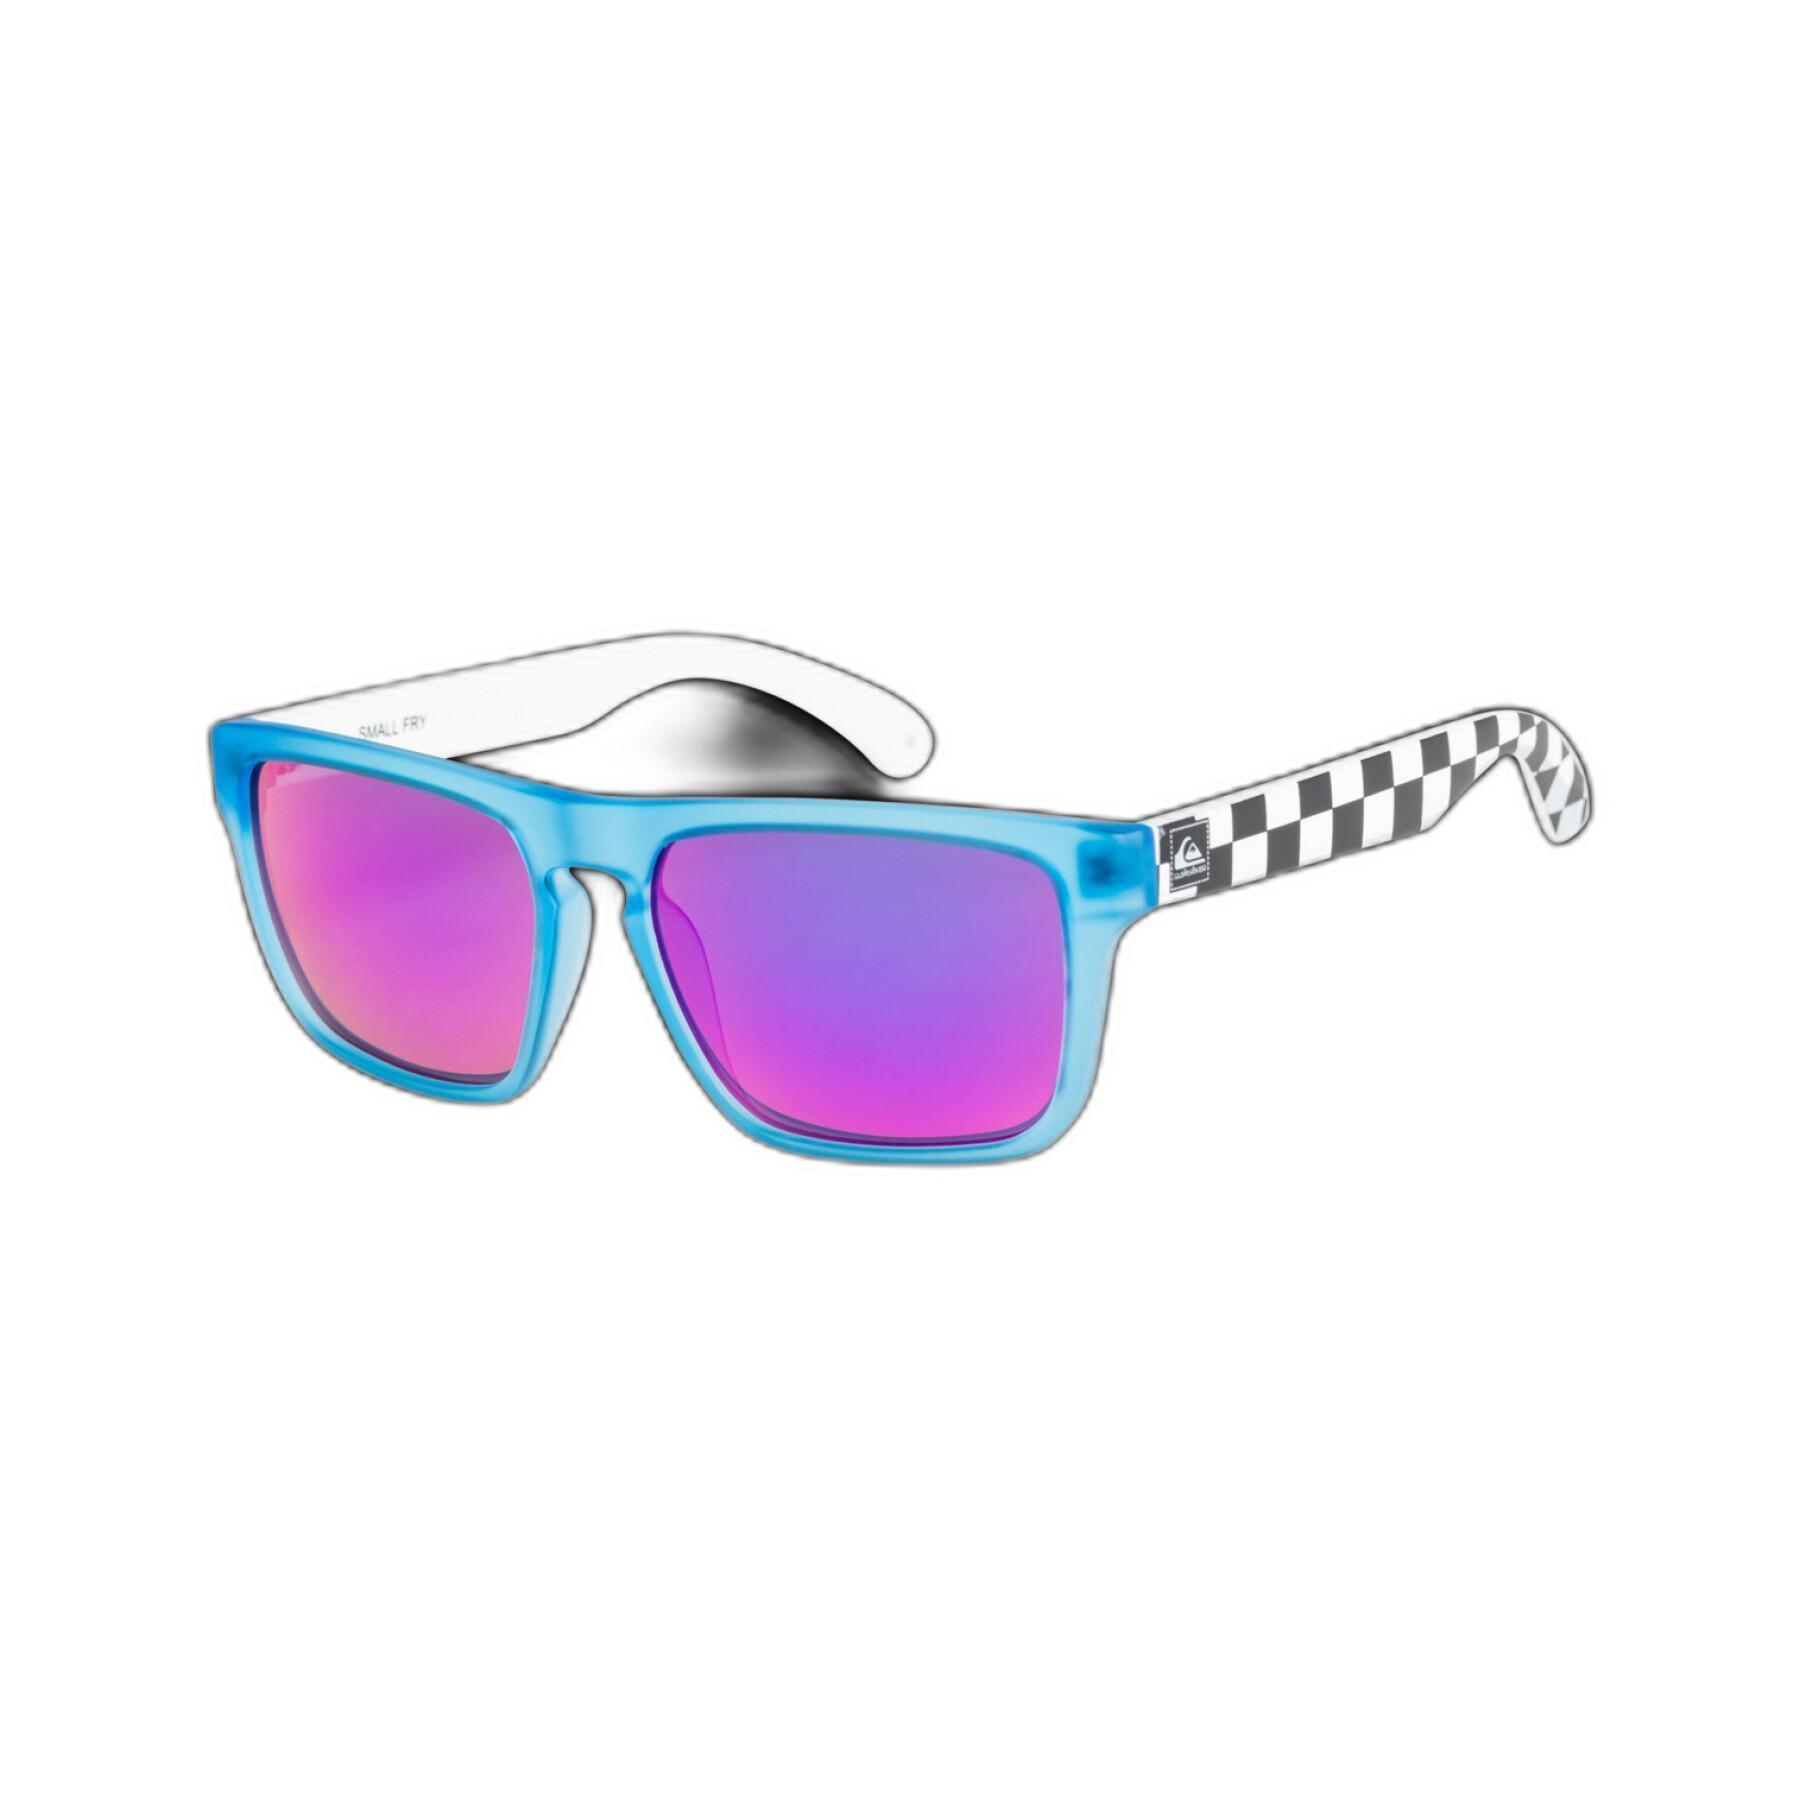 Kids sunglasses Quiksilver Small Fry